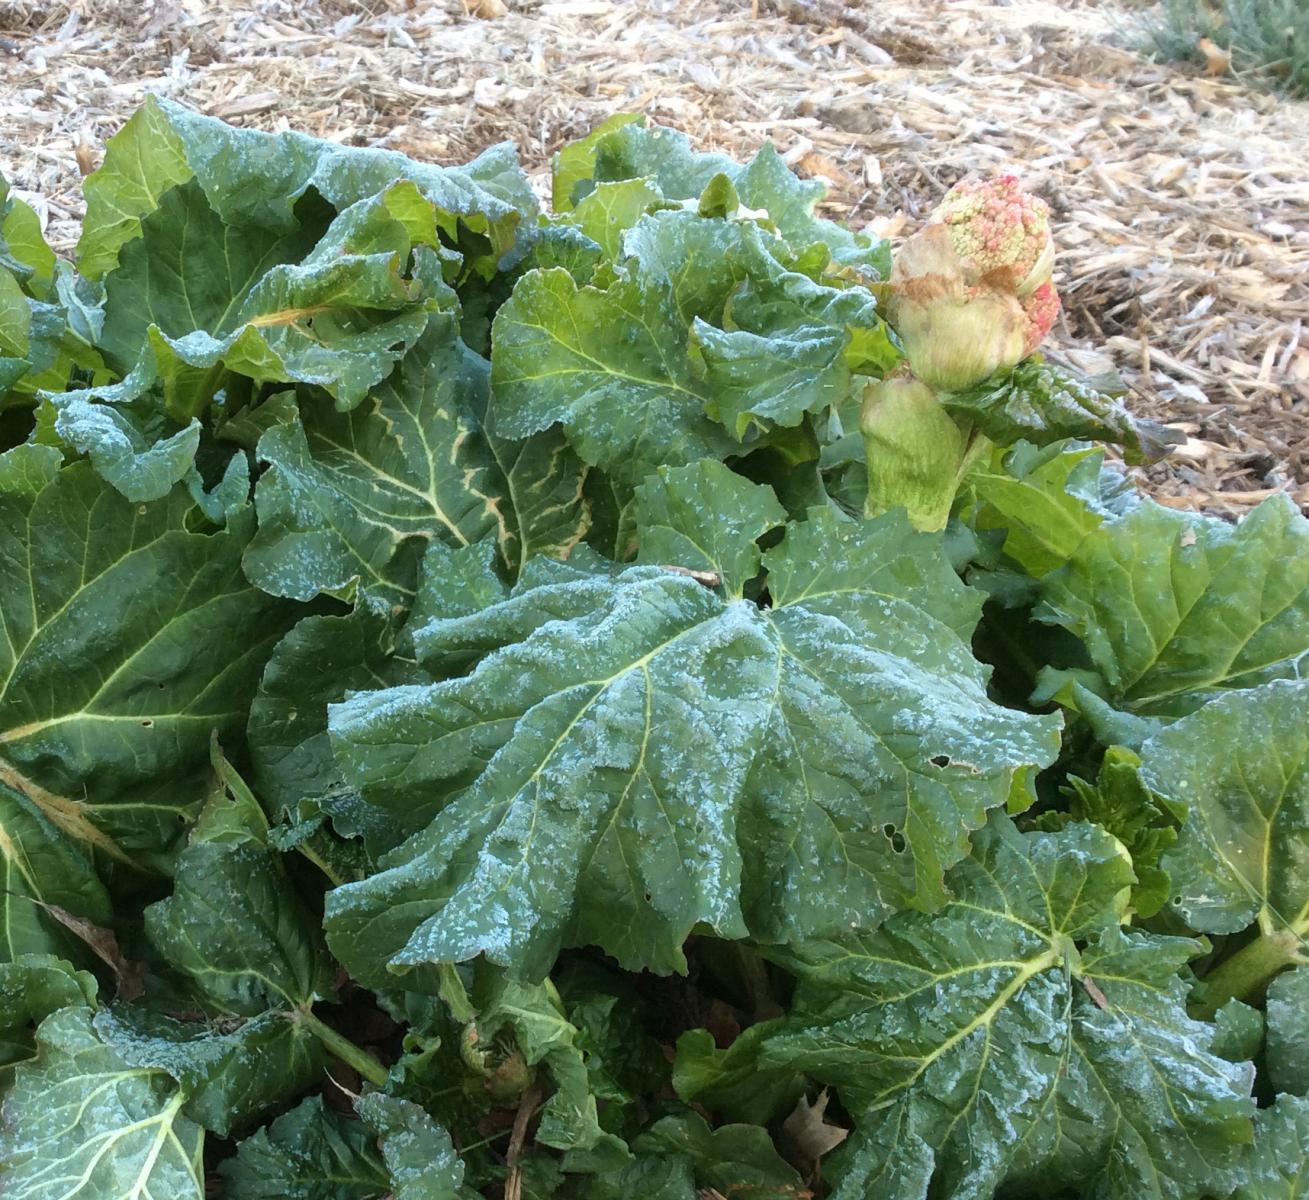 Image of frost damaged rhubarb leaves. 